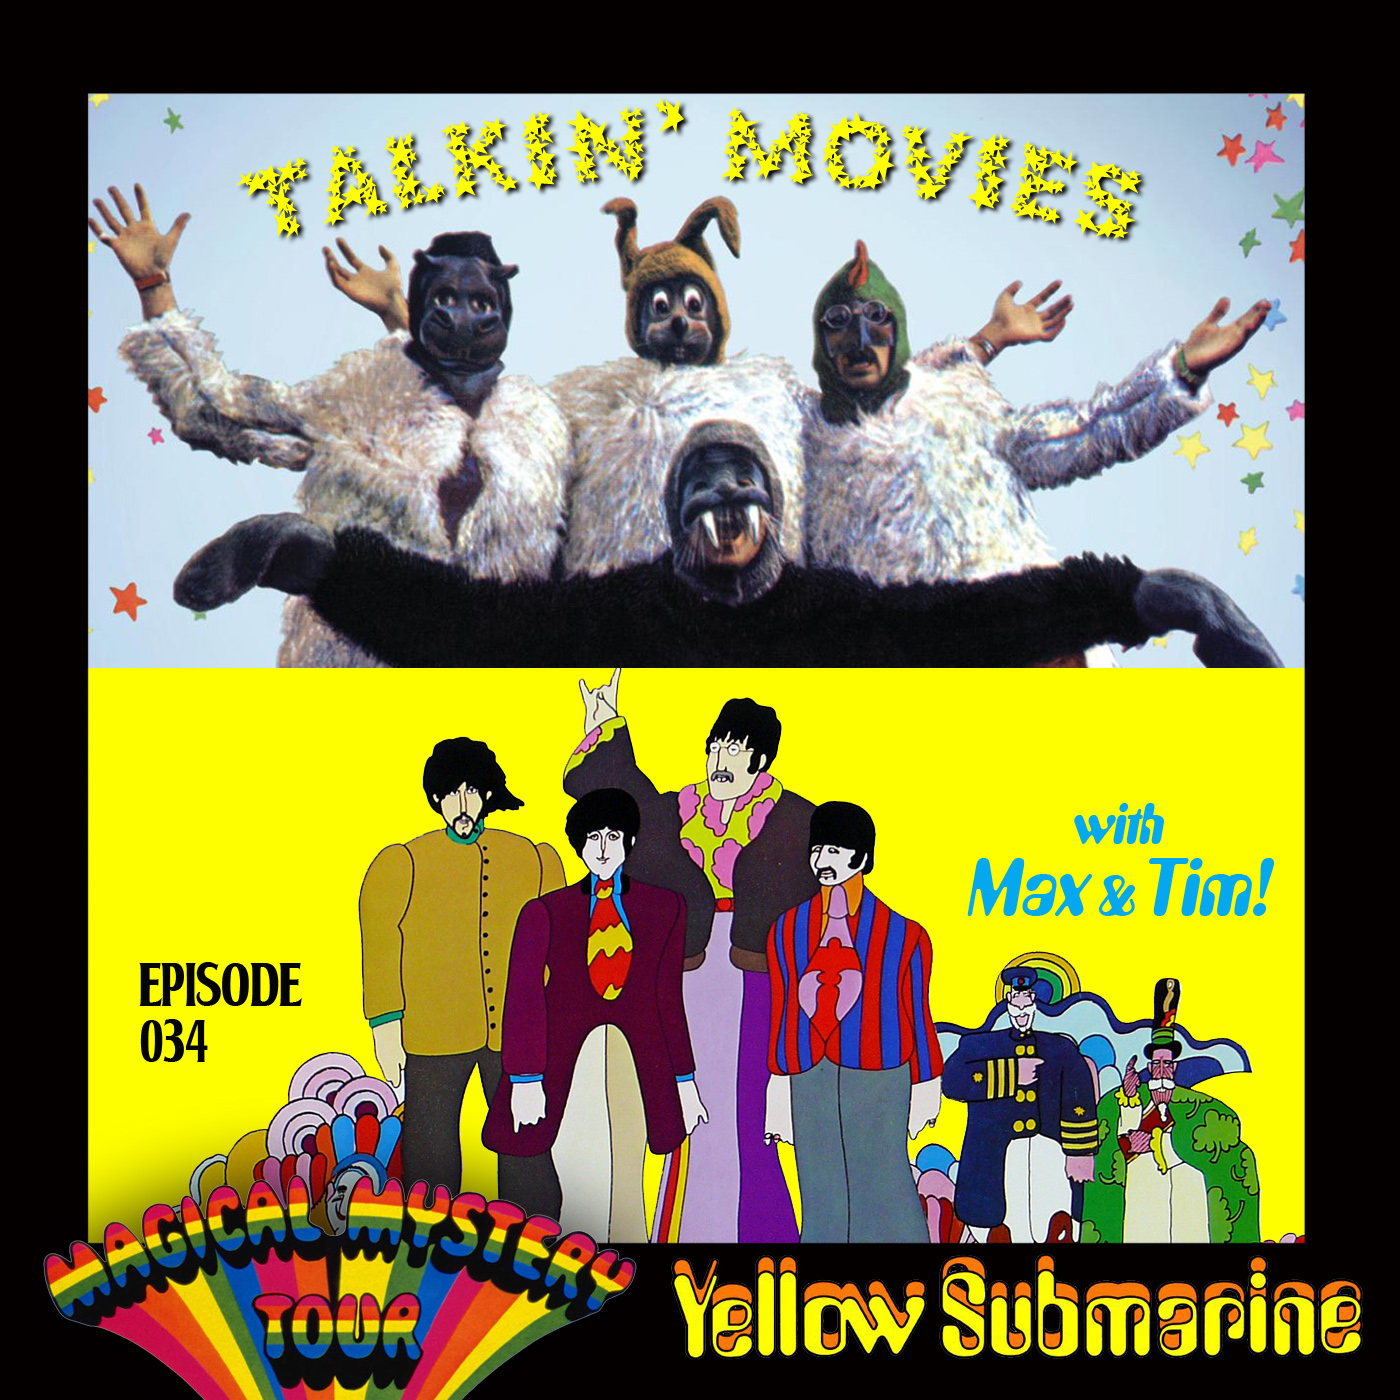 034 - Magical Mystery Tour & Yellow Submarine